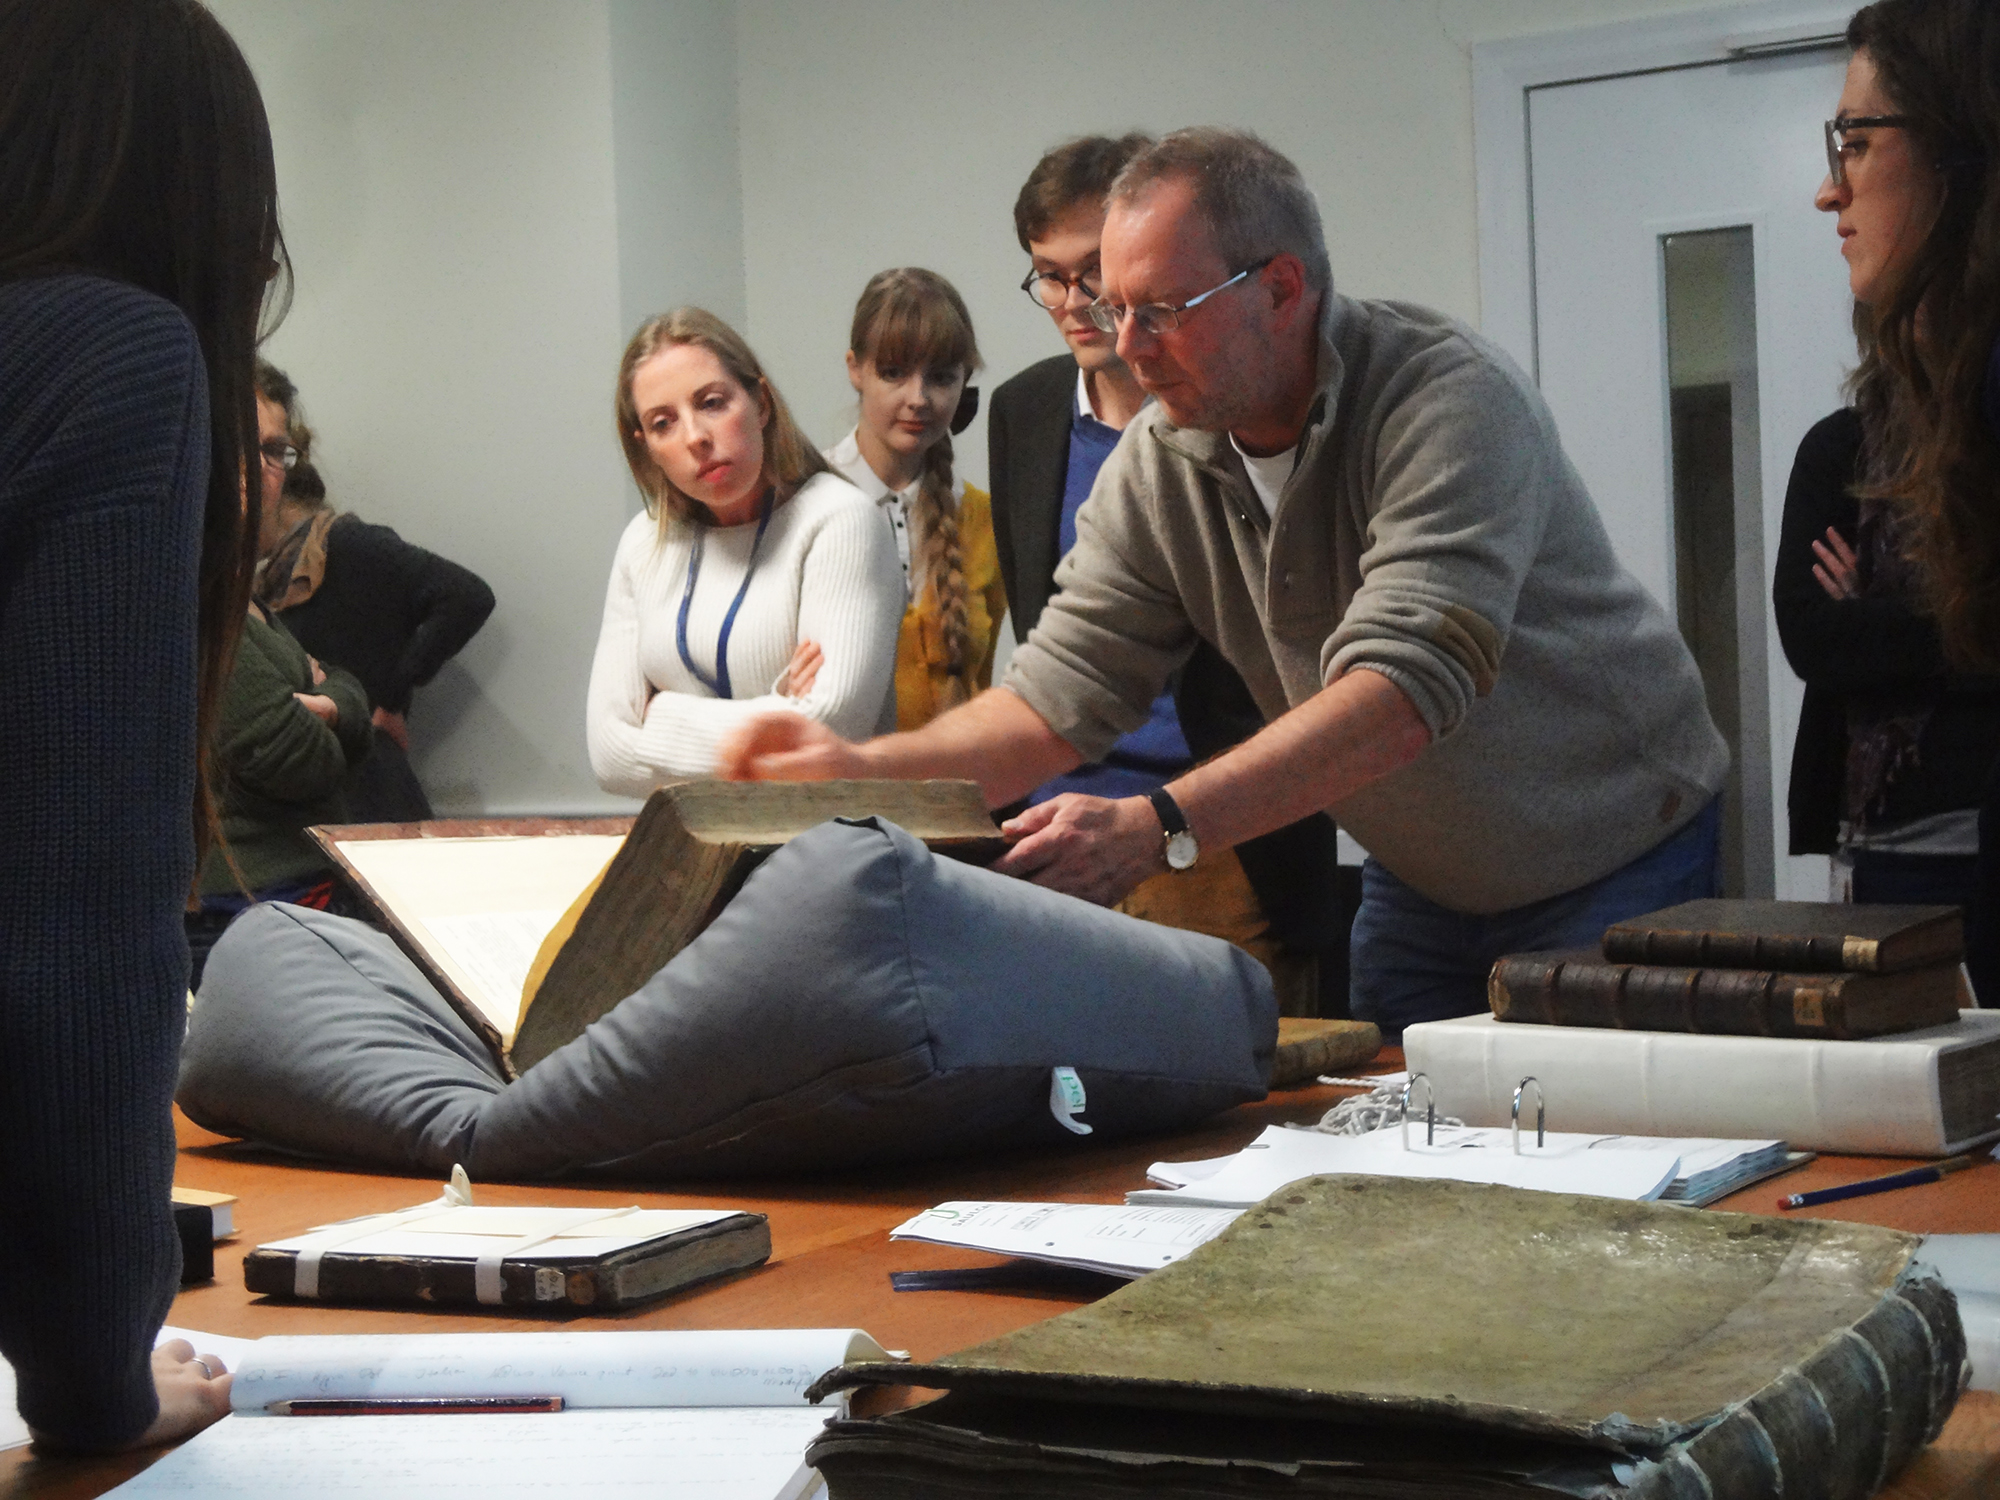 Dr Eisermann works through on of St Andrews' copies of the 1481 Koberger edition of Duns Scotus with the workshop attendants.